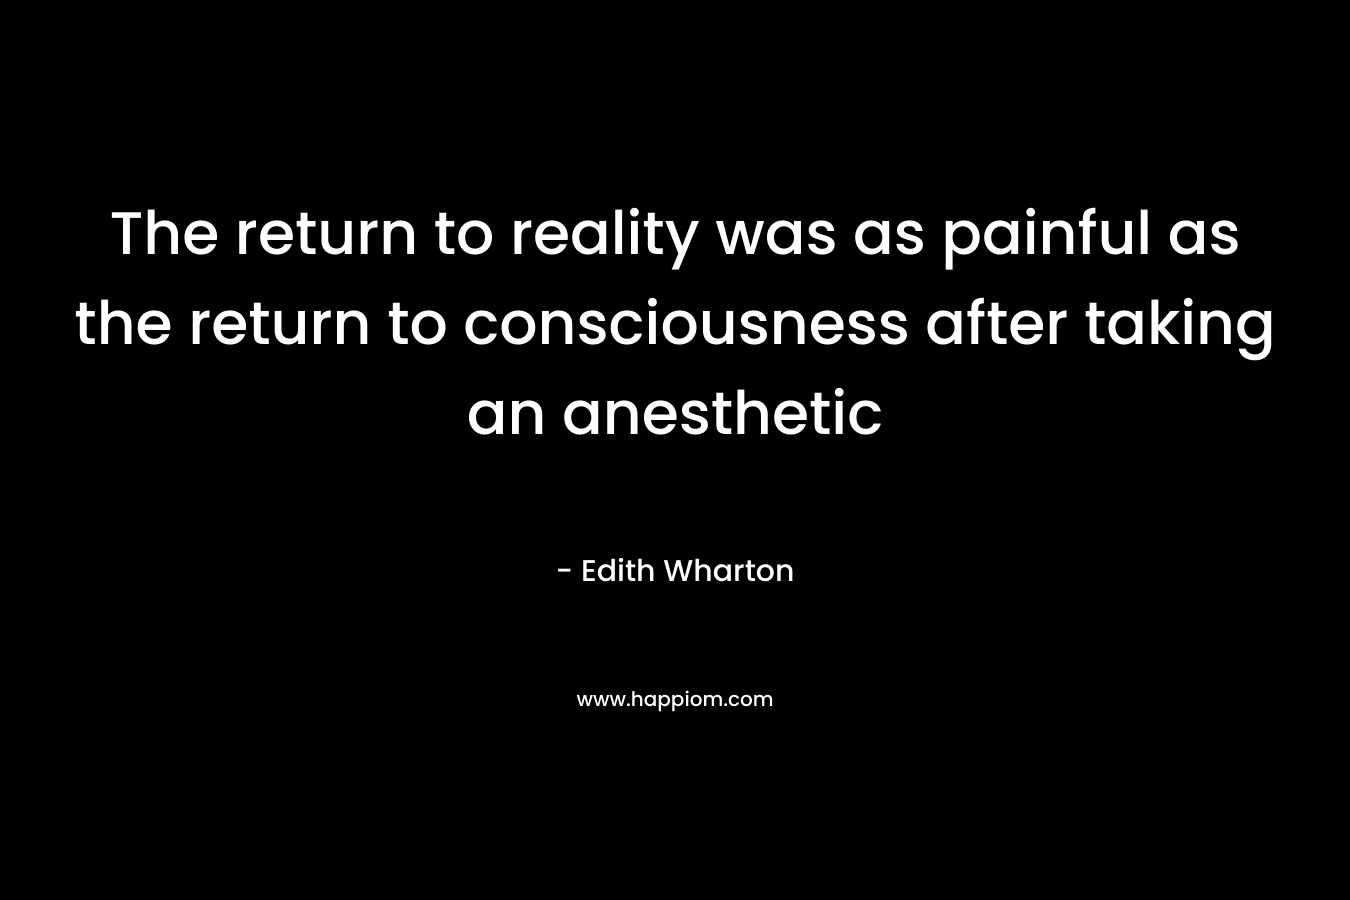 The return to reality was as painful as the return to consciousness after taking an anesthetic